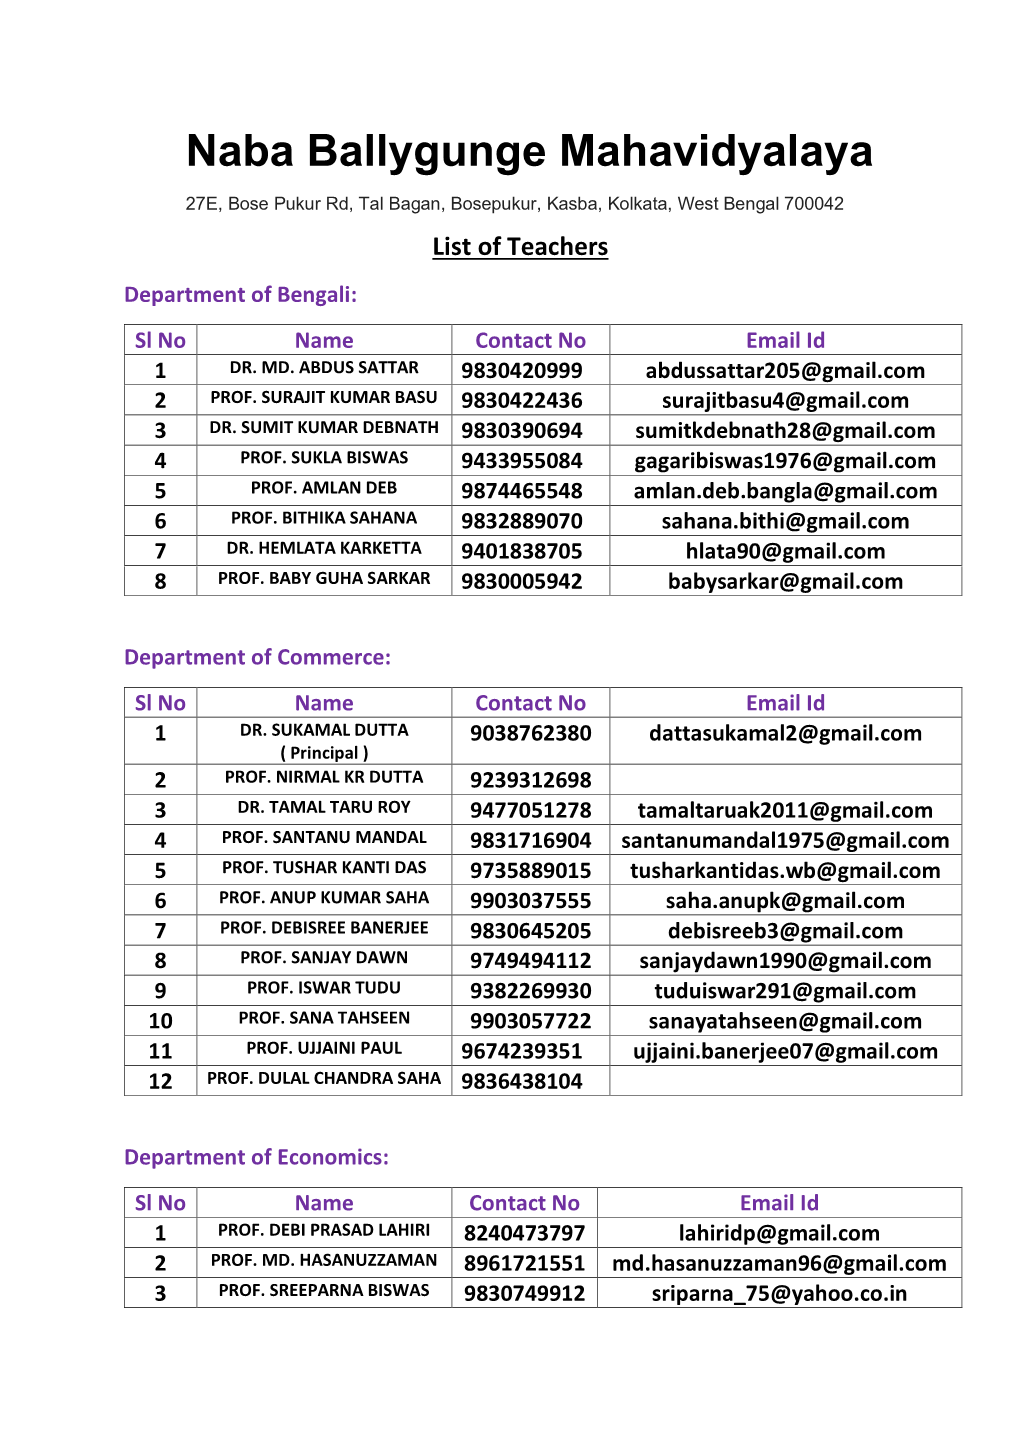 List of Teachers Department of Bengali: Sl No Name Contact No Email Id 1 DR